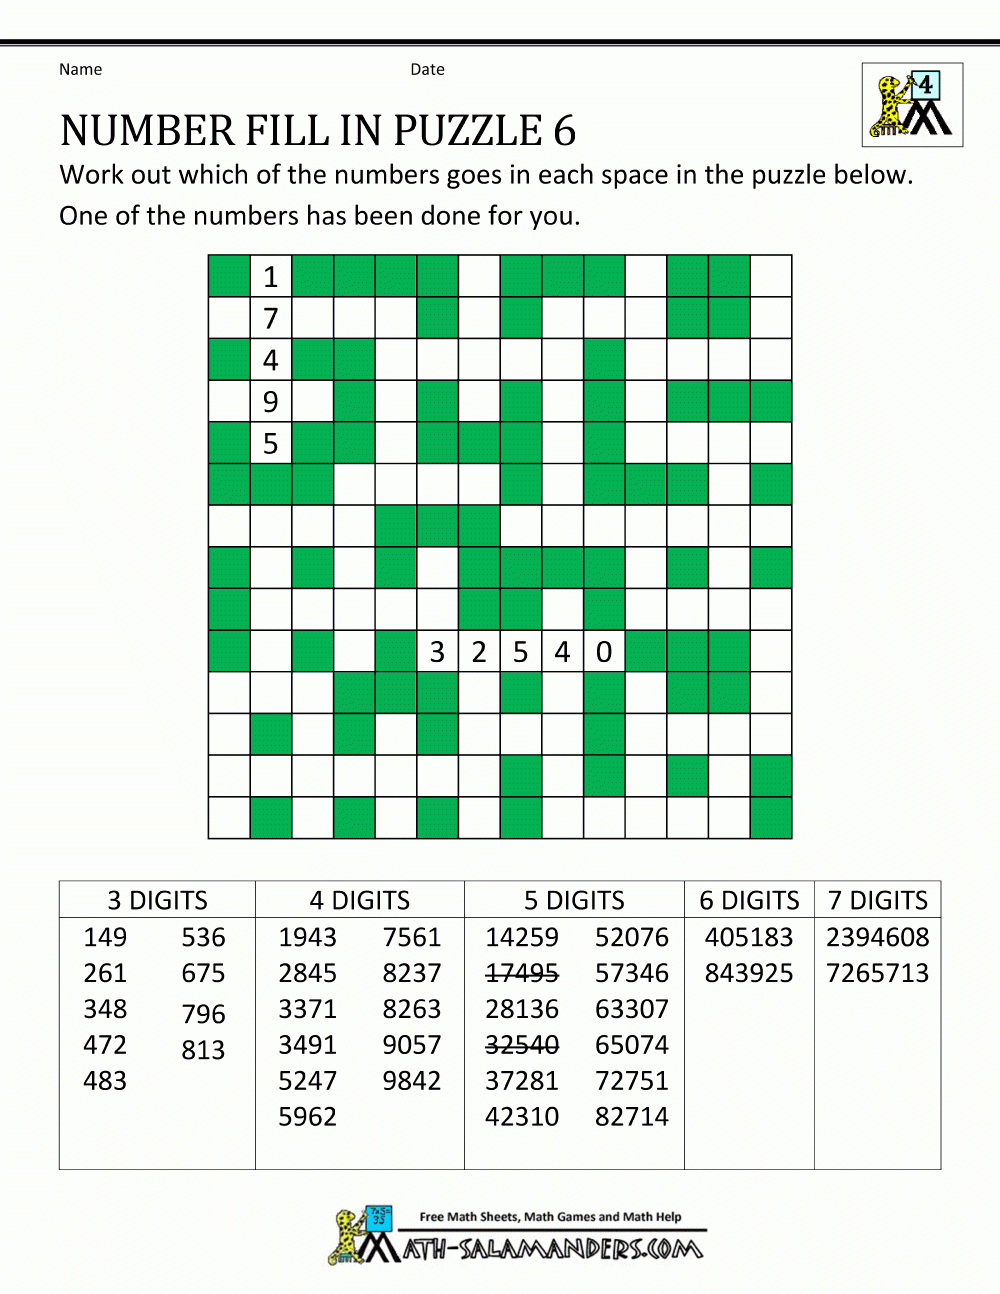 Number Fill In Puzzles Crosswords Crossword Puzzle - Printable Puzzle Fill Ins